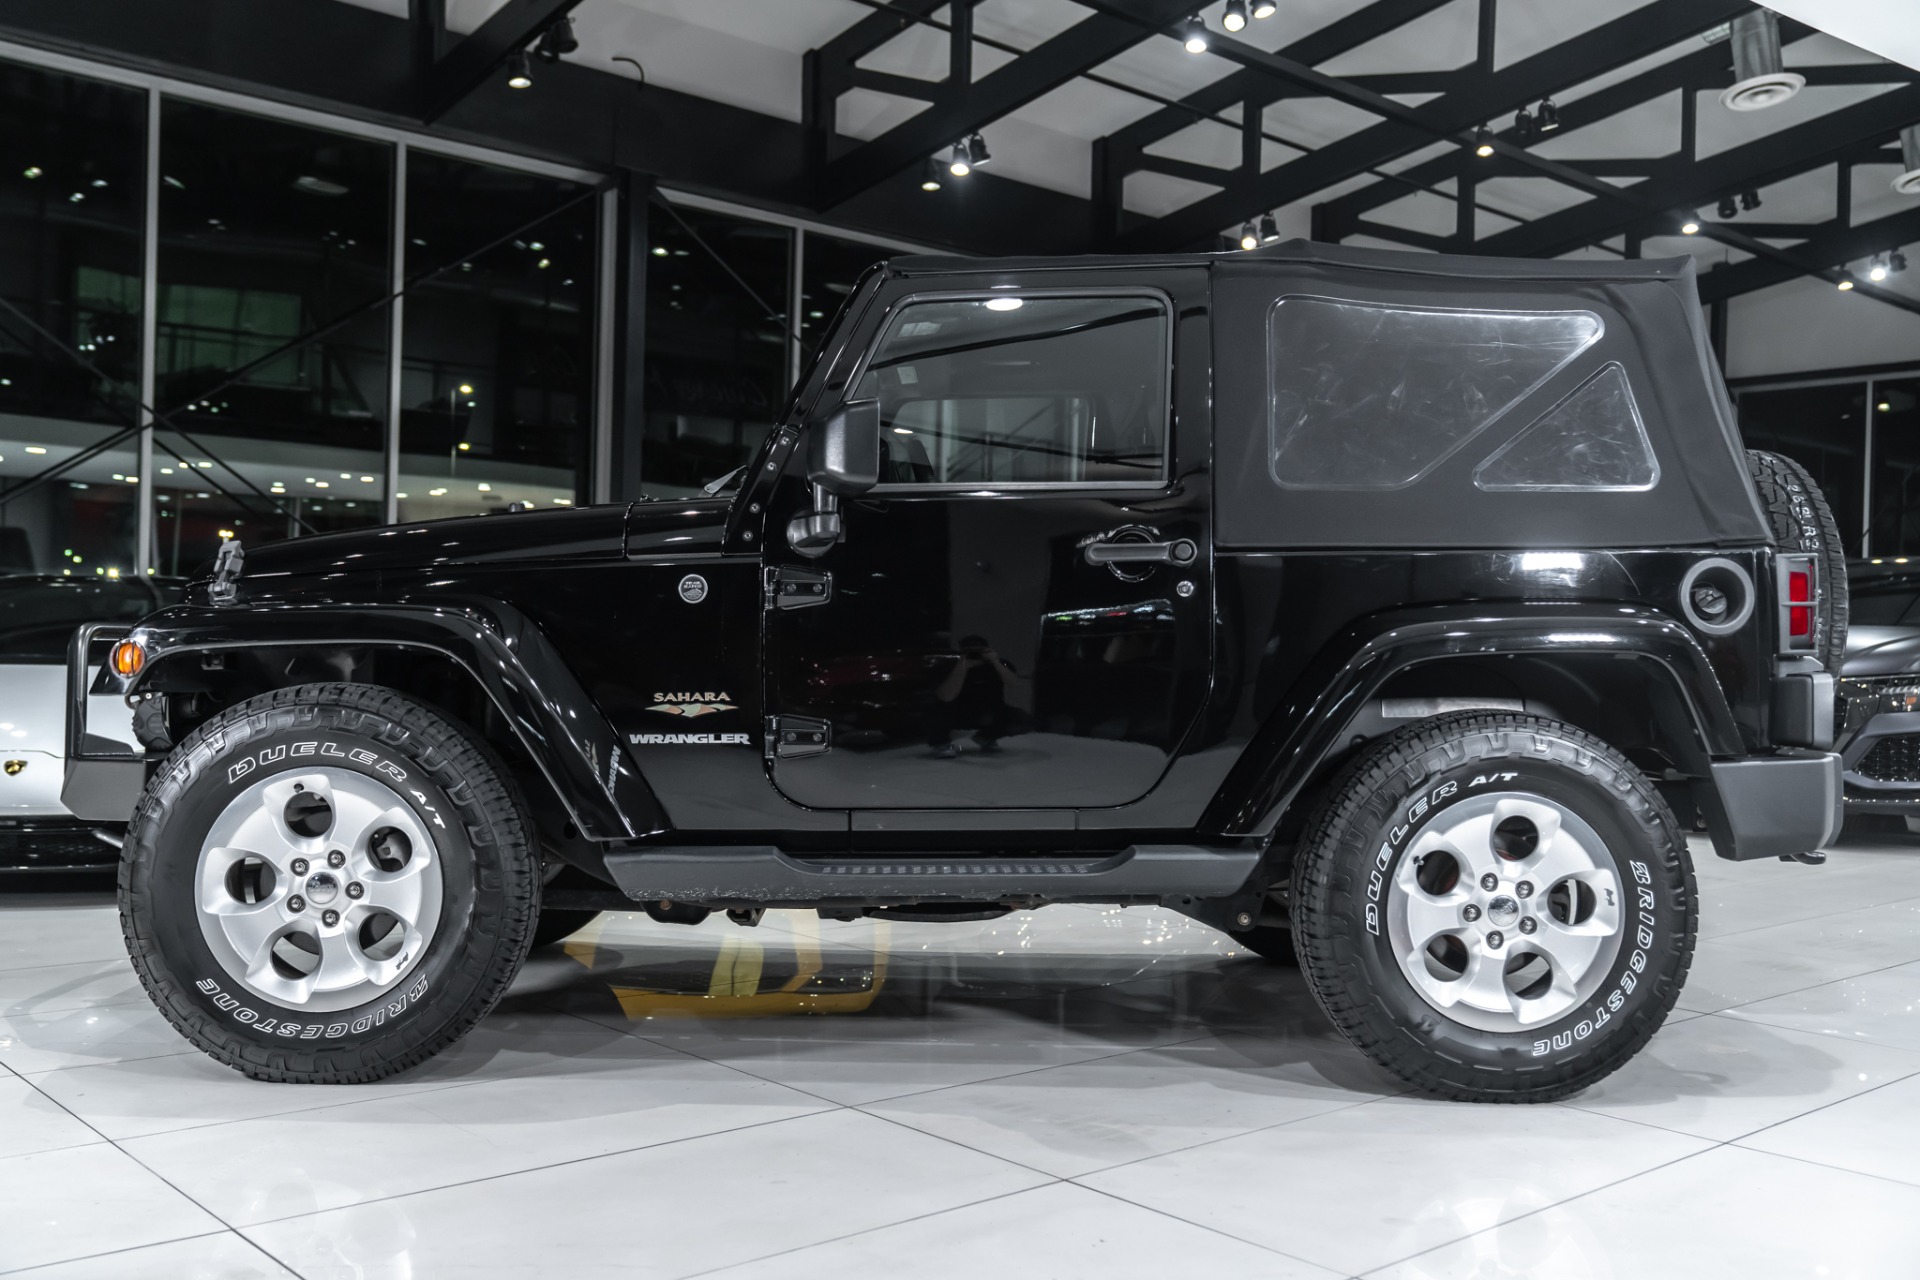 Used-2015-Jeep-Wrangler-Sahara-4x4-SUV-Heated-Front-Seats-Stinger-Head-Unit-Well-Equipped